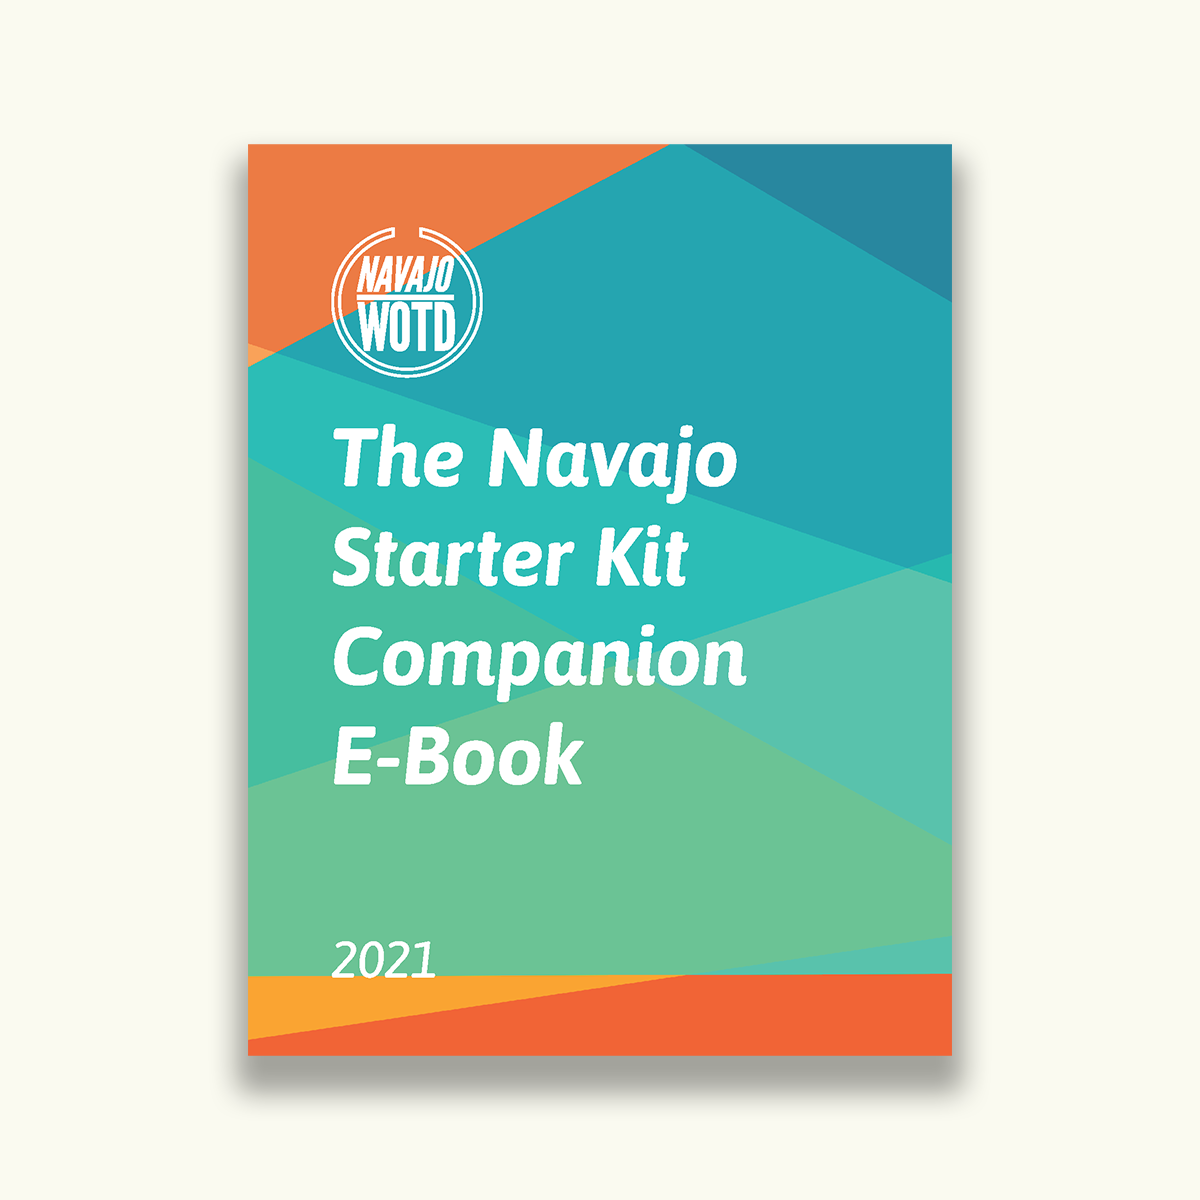 The Navajo Starter Kit digital MP3 album cover with NavajoWOTD.com logo and title